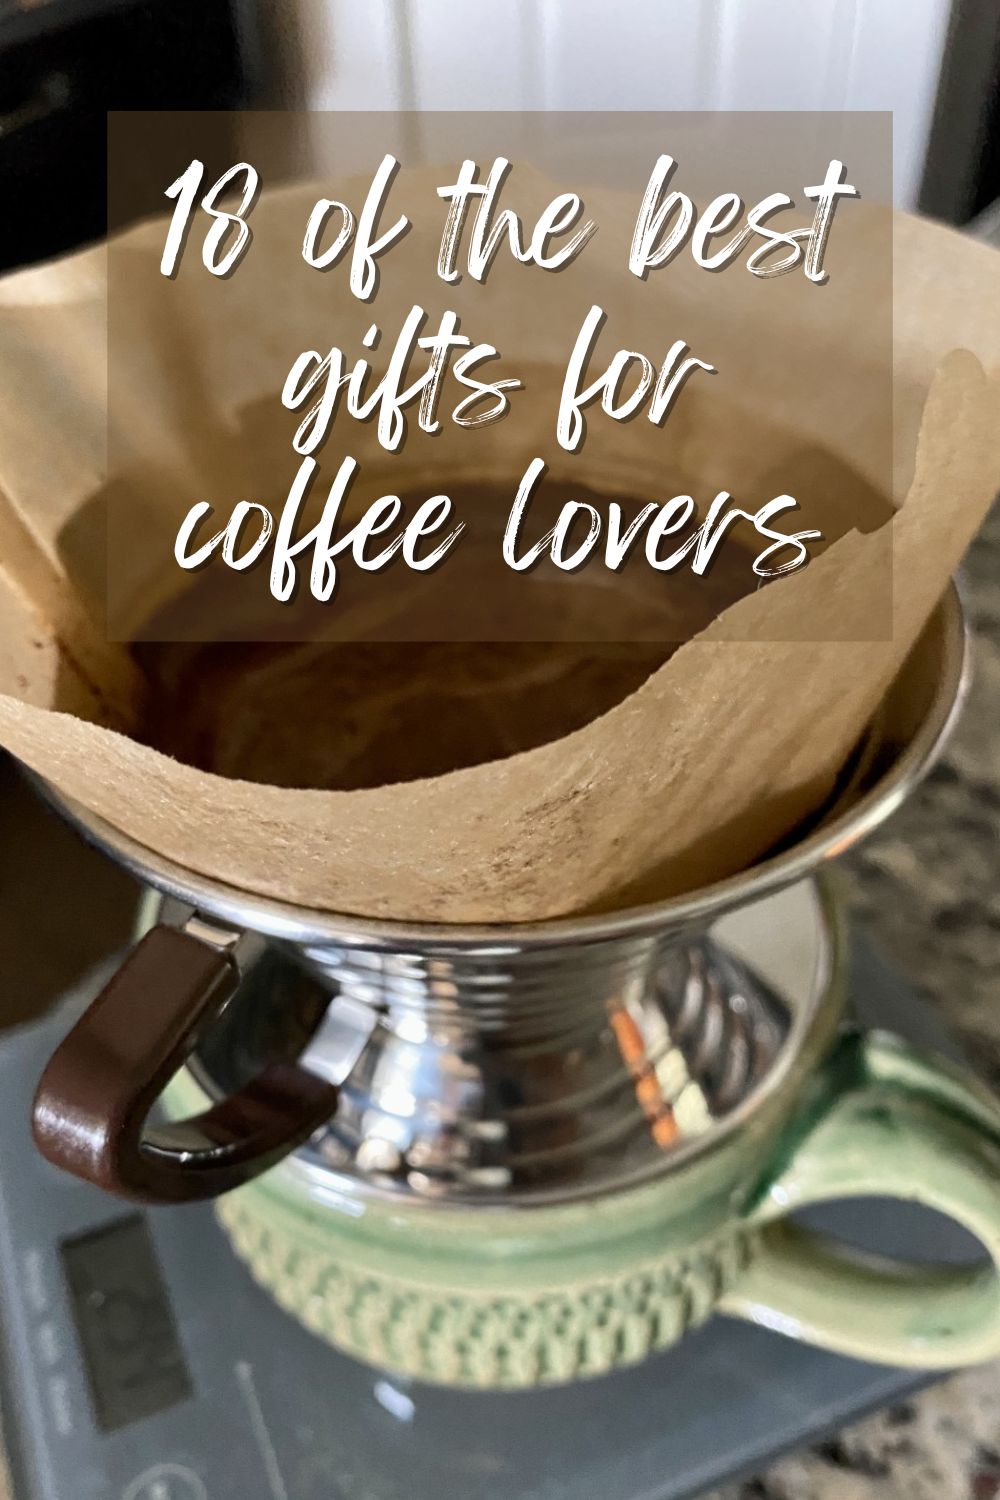 Gift Ideas for Coffee Lovers | I'm a huge coffee fan, always seeking the perfect cup...here's a list of the best presents for coffee lovers, holiday gifts for the coffee connoisseur in your life! From elevating their at home coffee to brewing a great cup while traveling, these coffee gift ideas are perfect. #coffeelover #giftideas #giftguide